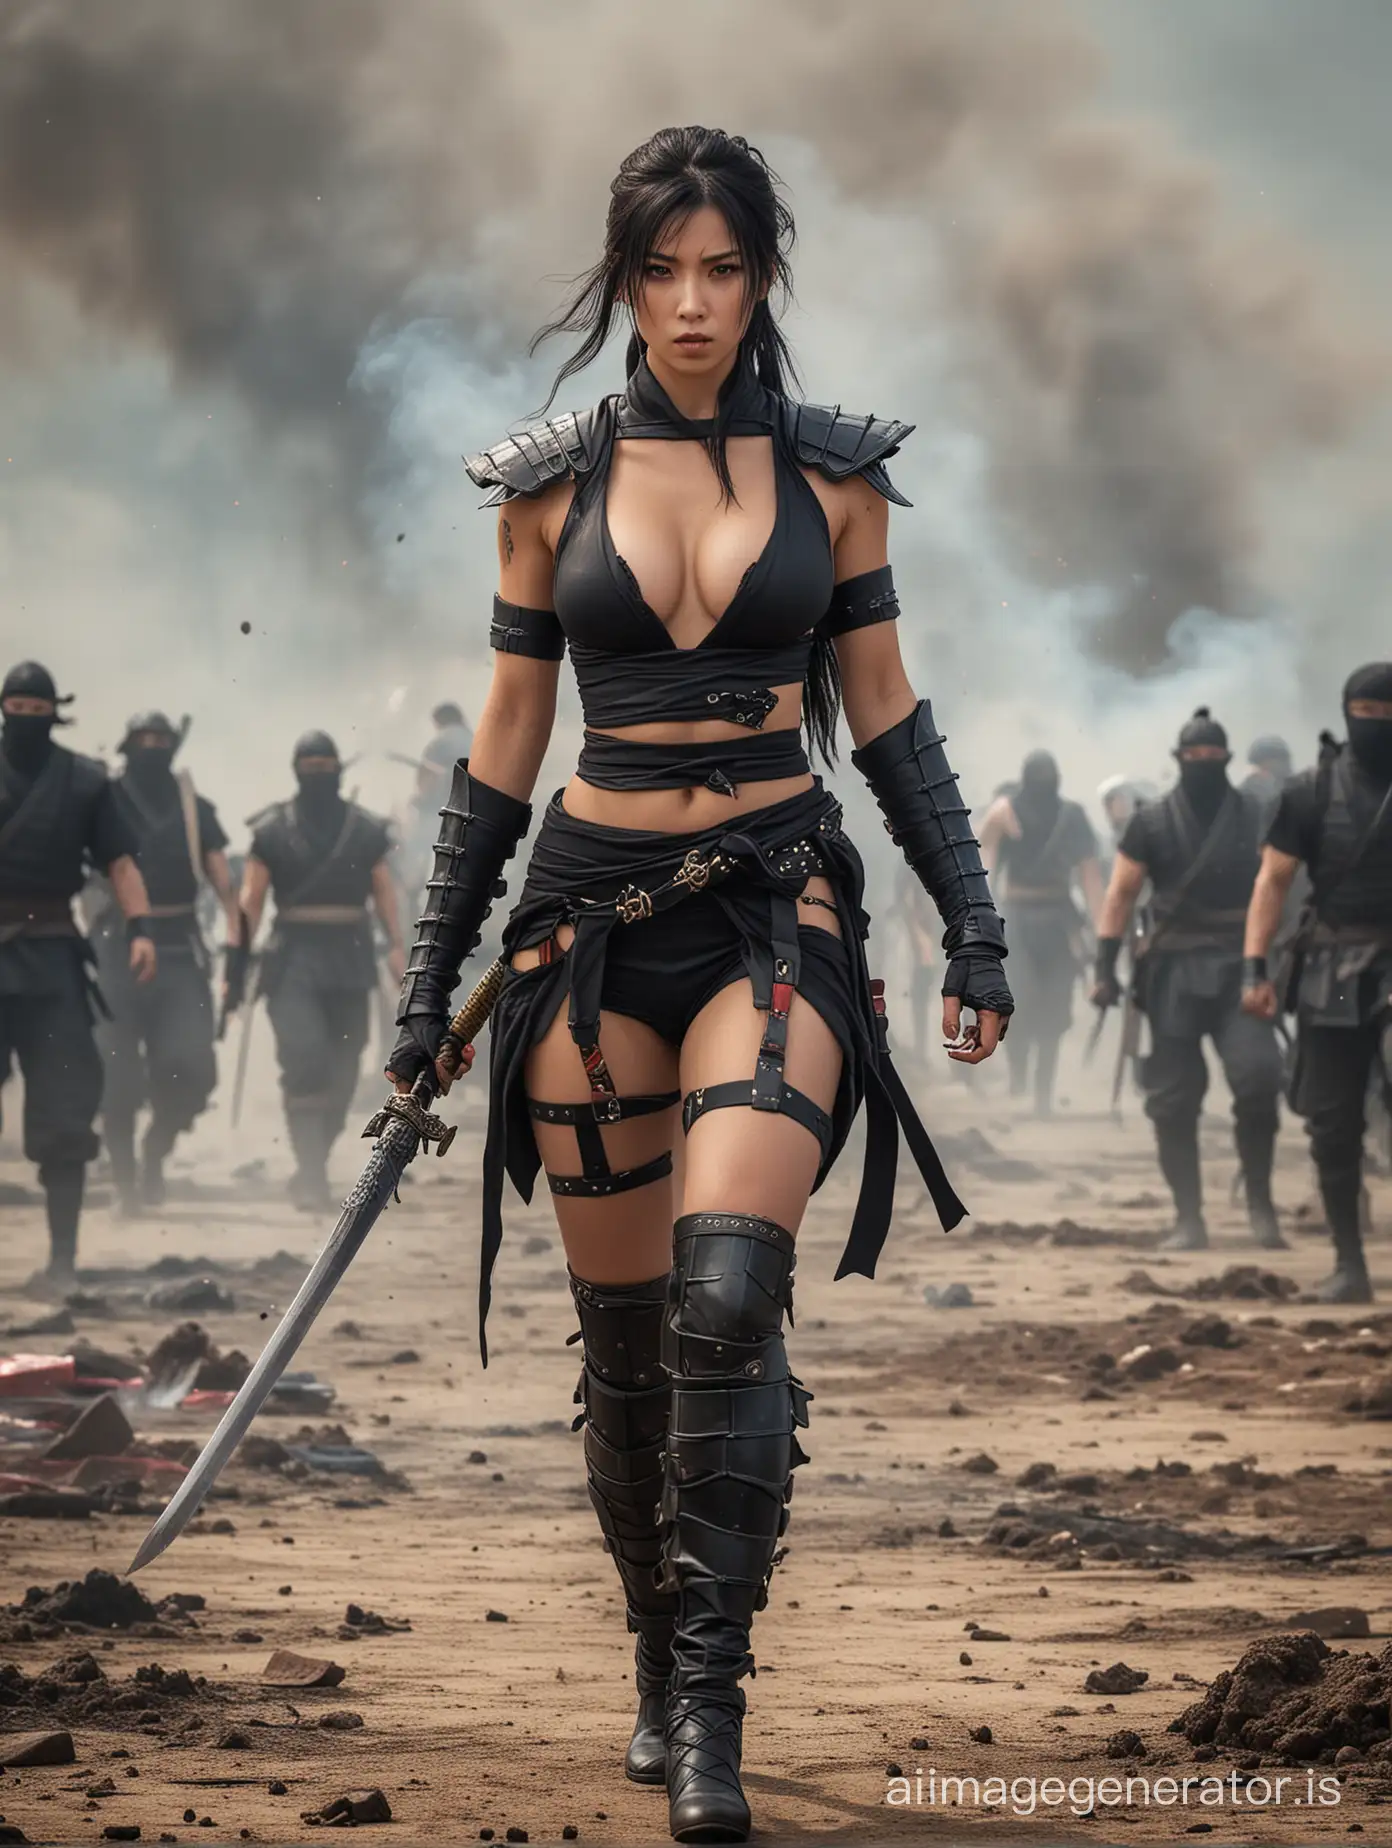 No weapons in her hands: scantily dressed female ninja, skimpy clothing, walking over a battlefield. The battle has been won, smoke everywhere. Dead bodies on the floor. Eyes of the big dragon watching her. No other ninjas in the picture. (perfect face)